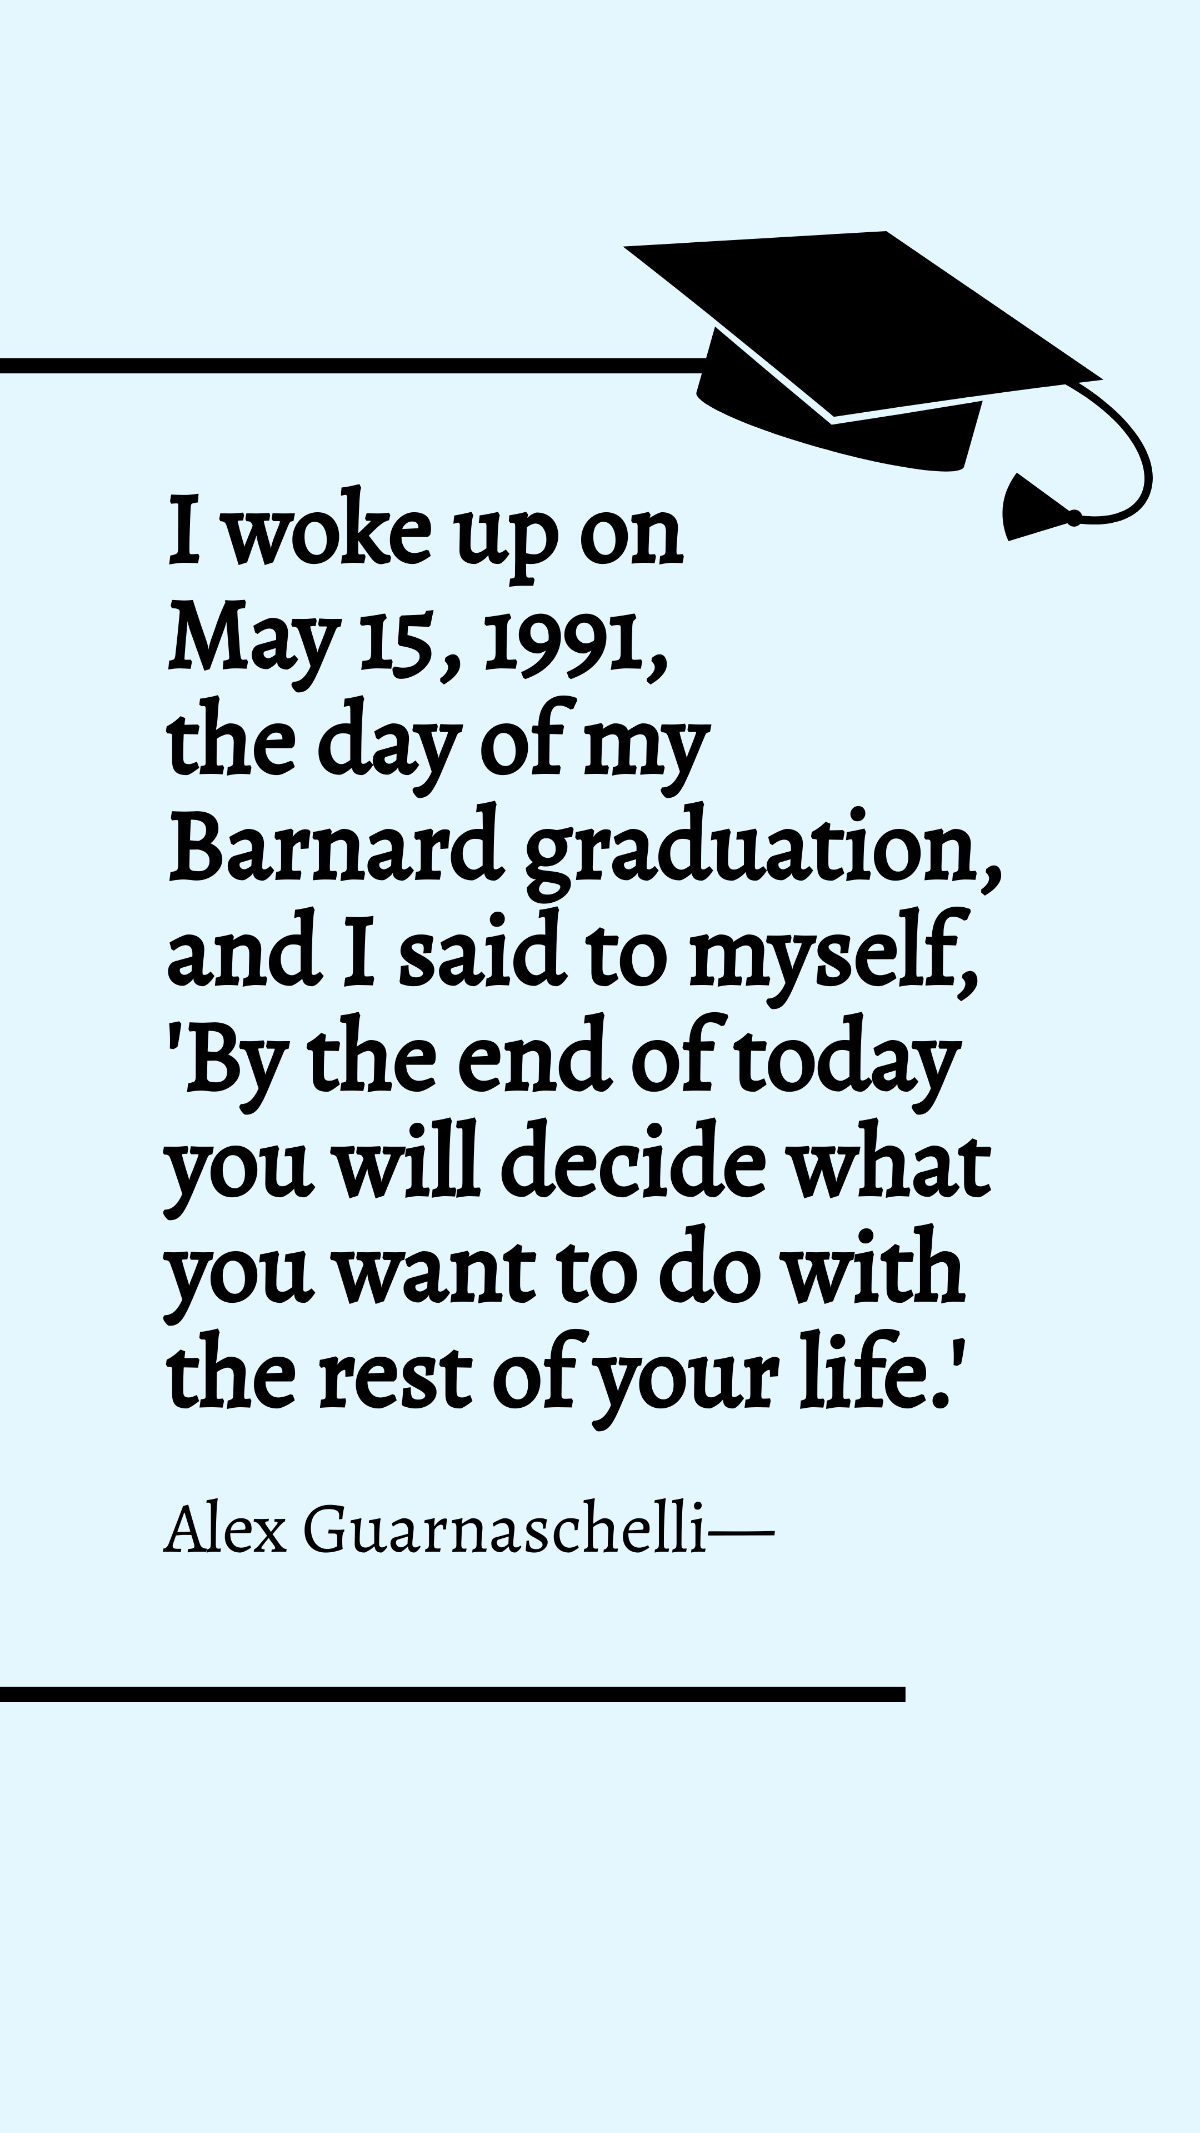 Free Alex Guarnaschelli - I woke up on May 15, 1991, the day of my Barnard graduation, and I said to myself, 'By the end of today you will decide what you want to do with the rest of your life.' Template